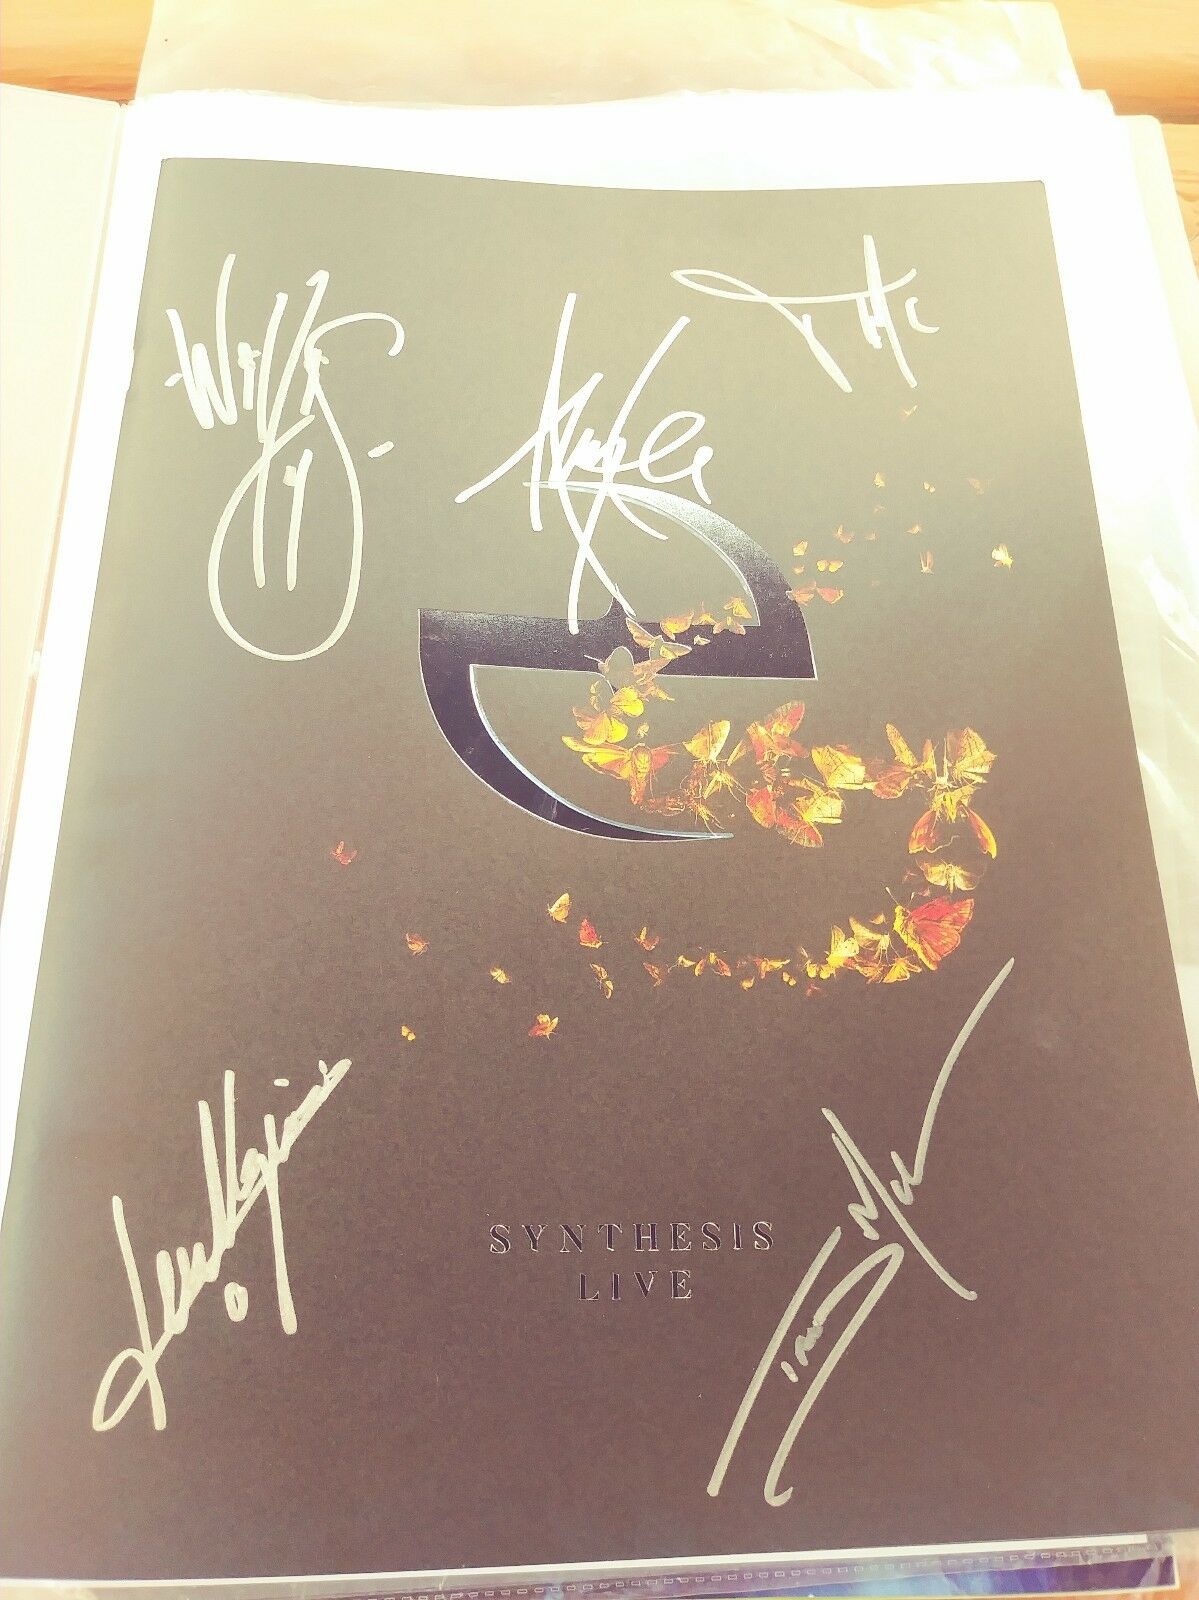 Evanescence Rock Band Musicians Signed Synthesis Live Tour Program Amy Lee